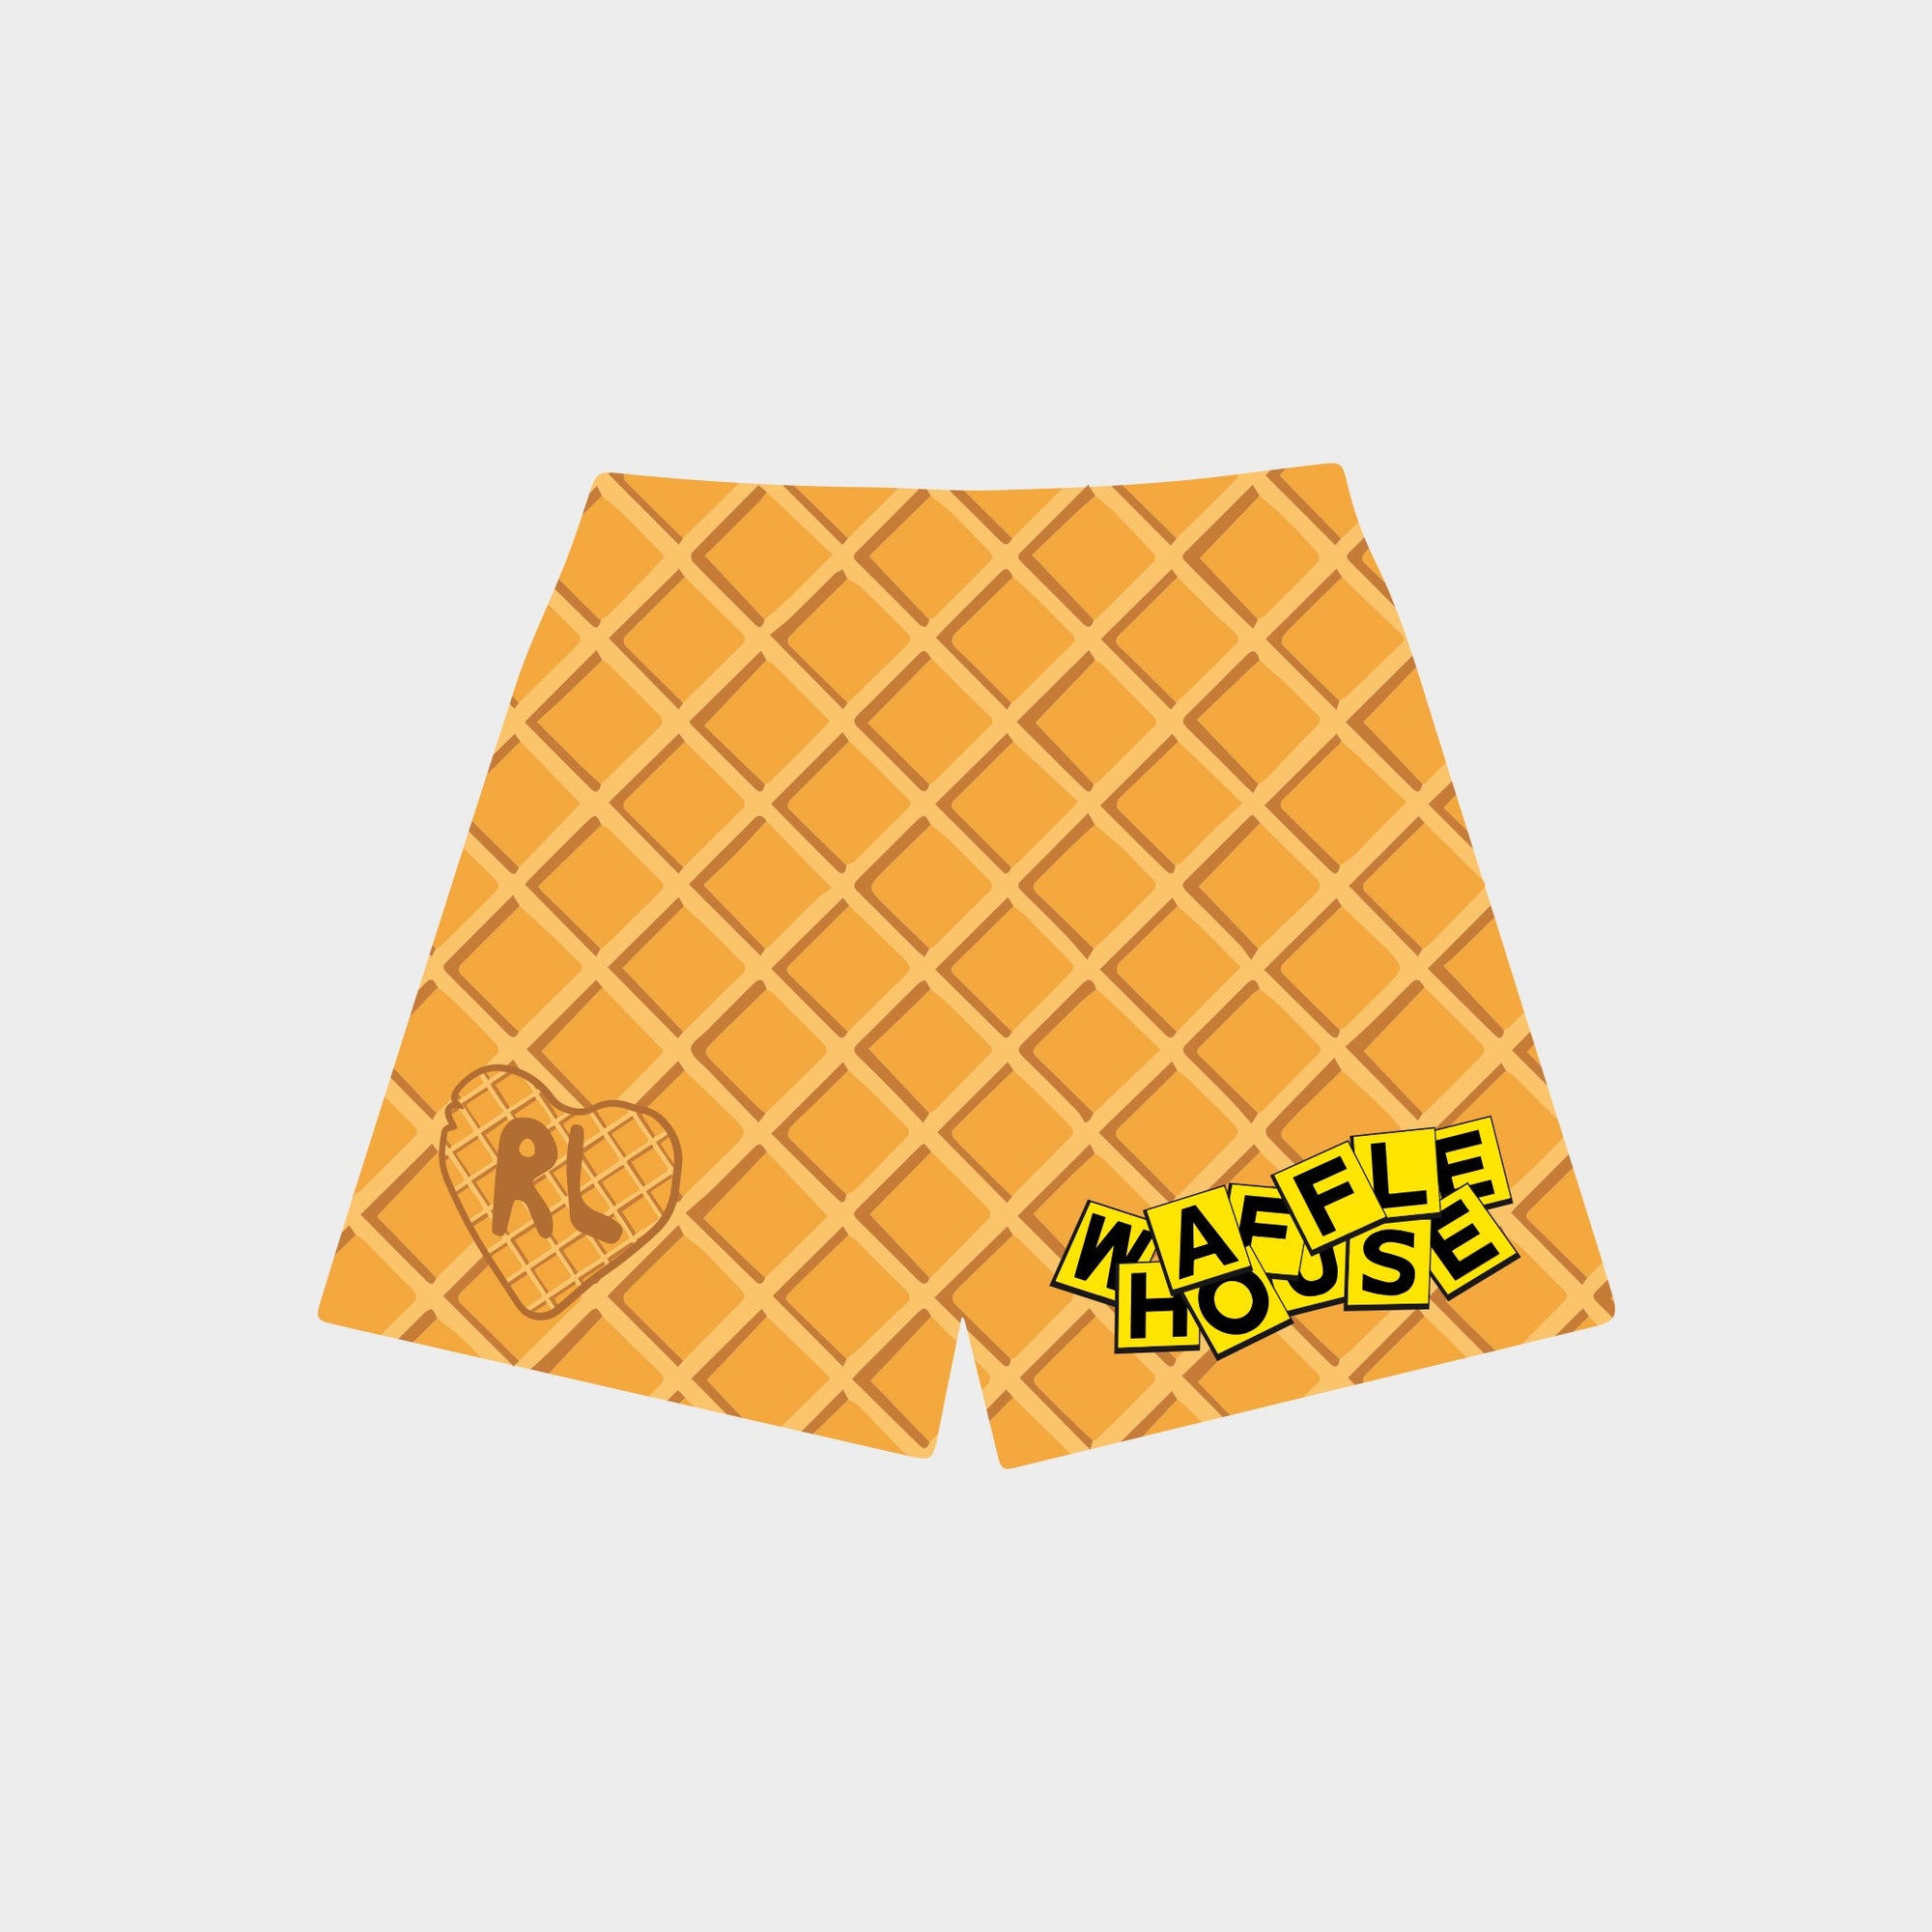 "More Waffles" Mesh Shorts - RED LETTERS